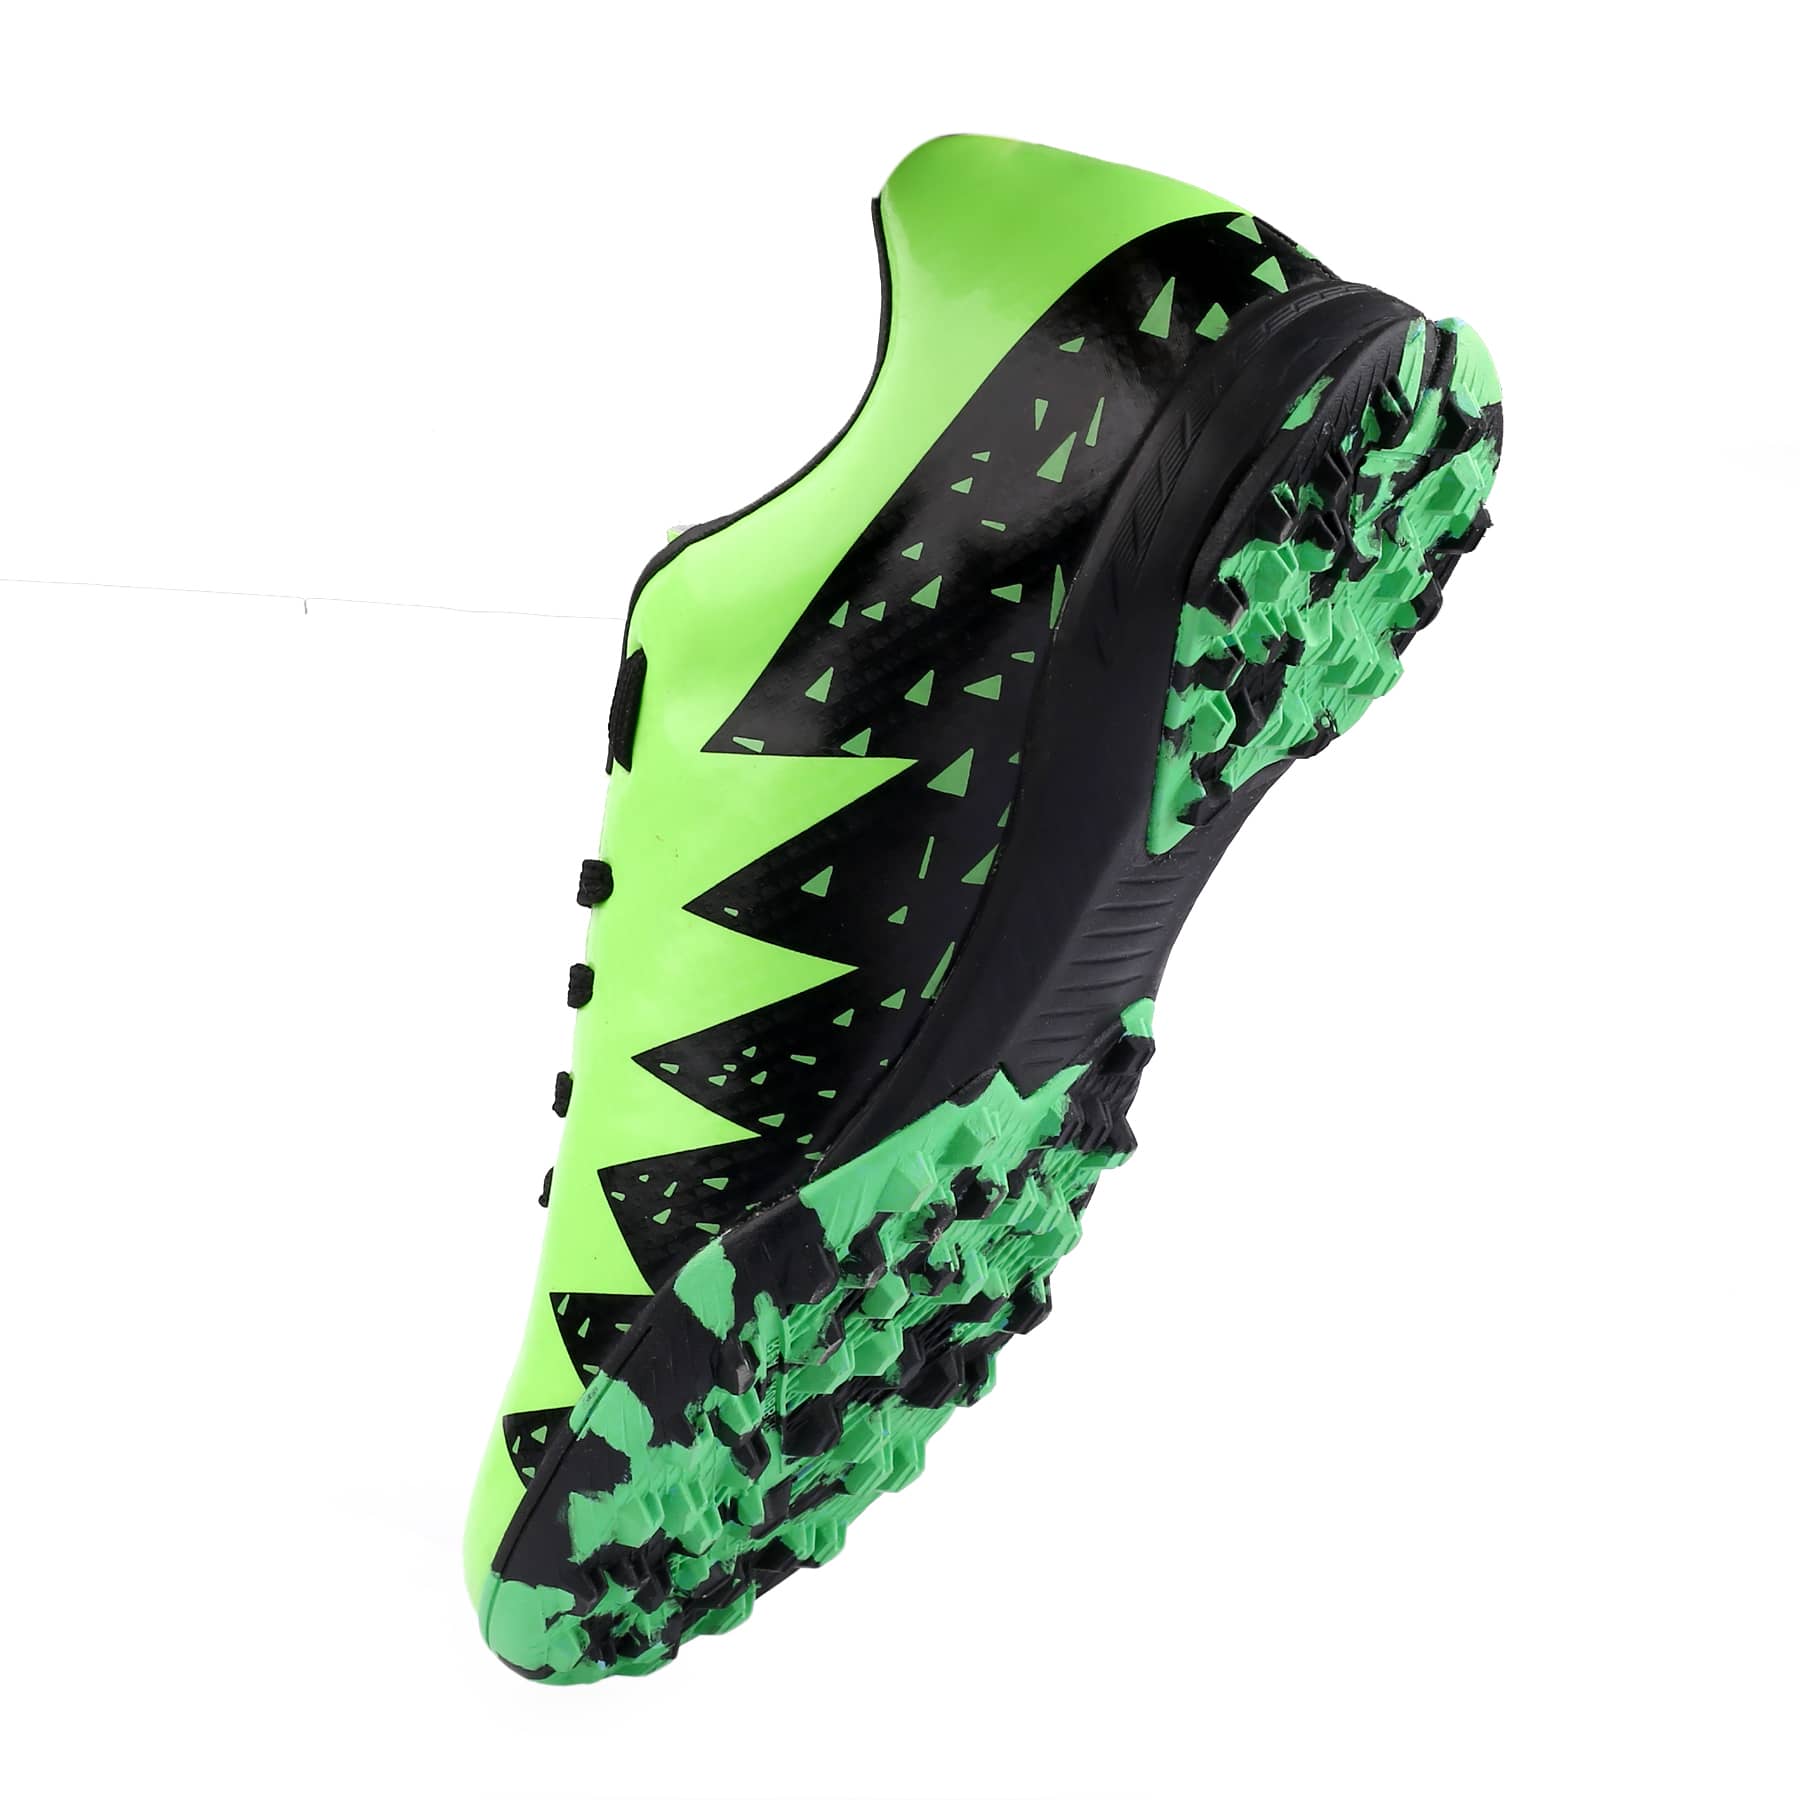 Bacca Bucci Neon Strike Pro Futsal Shoes – High-Performance Indoor Soccer Footwear with Enhanced Grip Sole, Dynamic Fit, Lightweight Design in Striking Neon Green with Agile Traction Control